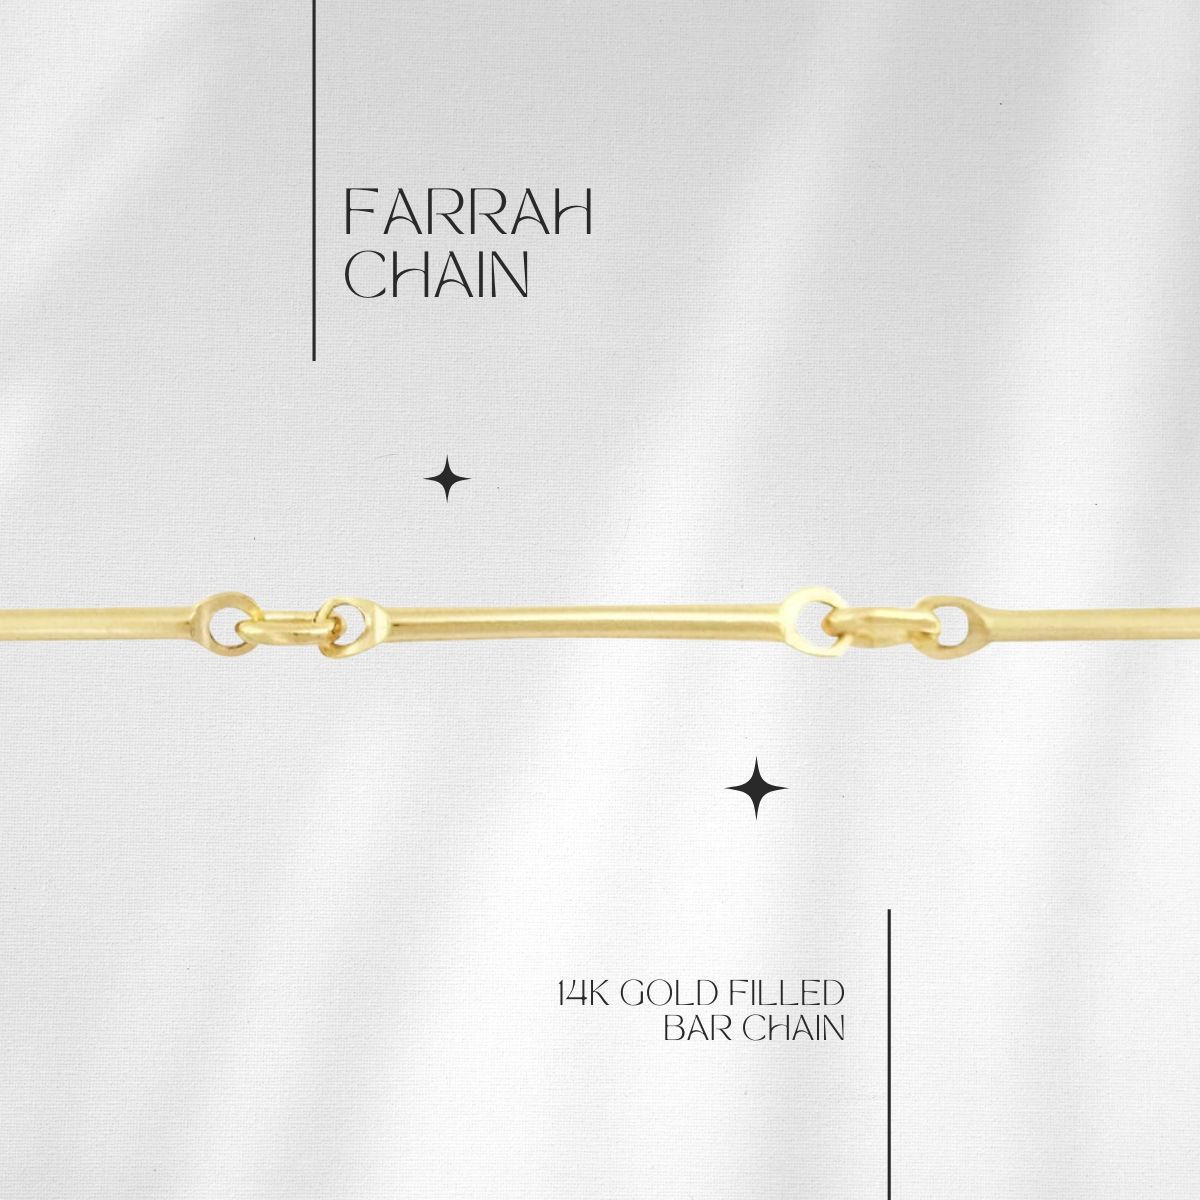 Farrah Bar Chain in 14k gf // RESERVATION  for IN-PERSON Permanent Jewelry